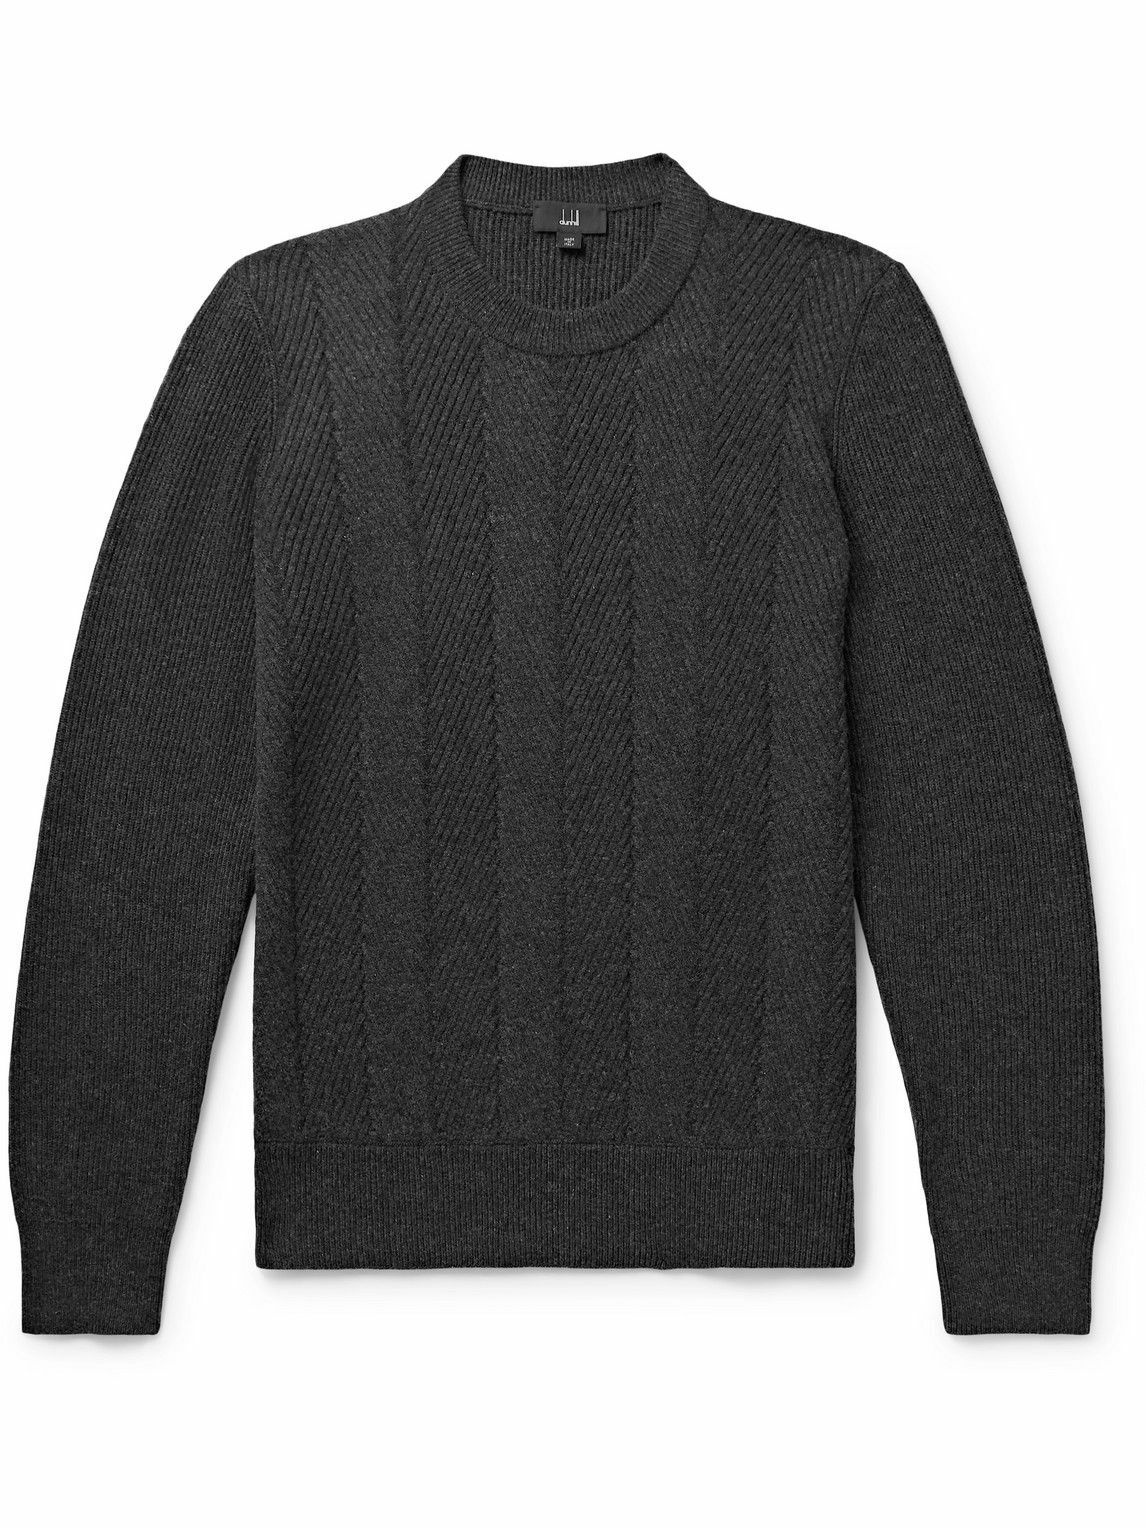 Dunhill - Ribbed Herringbone Cashmere Sweater - Gray Dunhill